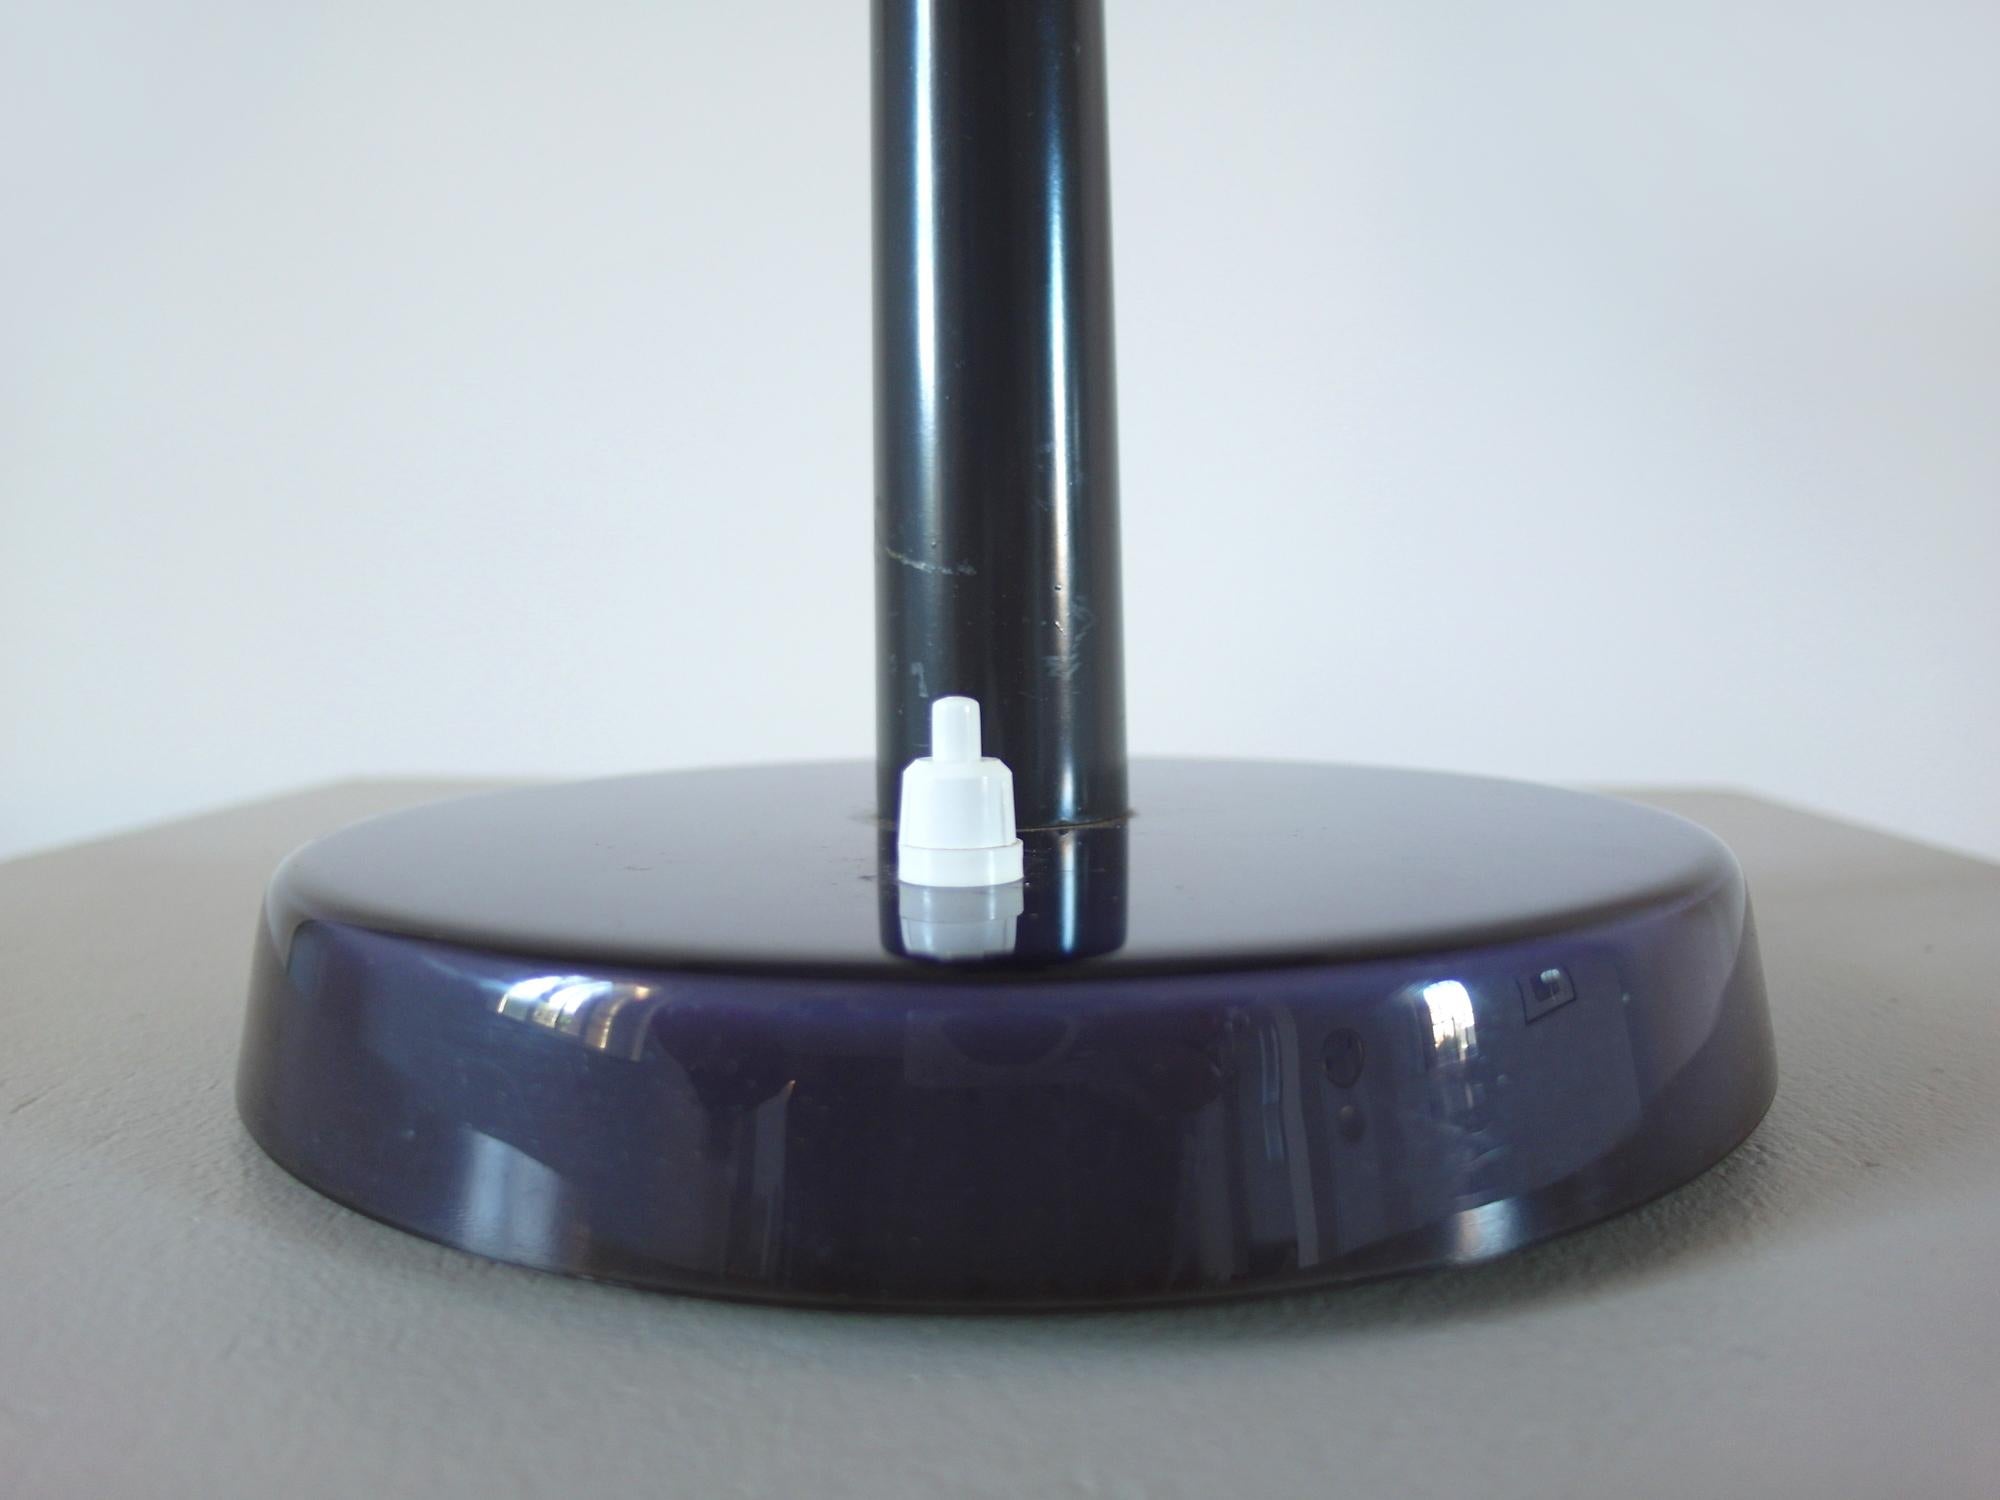 Purple Tuomas Table Light in by Yki Nummi for Stockmann-Orno, Finland, 1950s For Sale 2